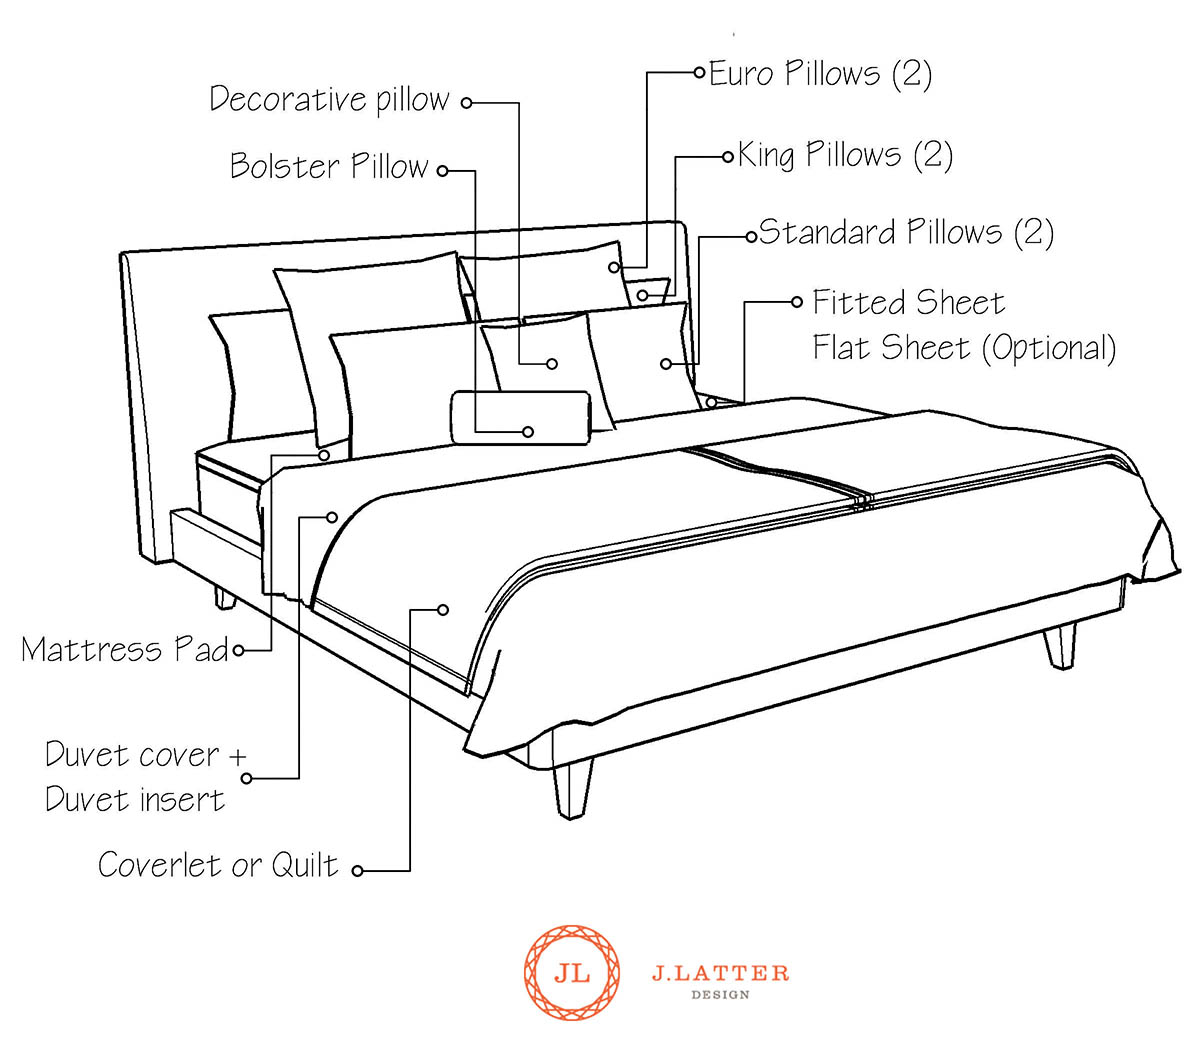 Basic Parts of Bedding You Need to Know